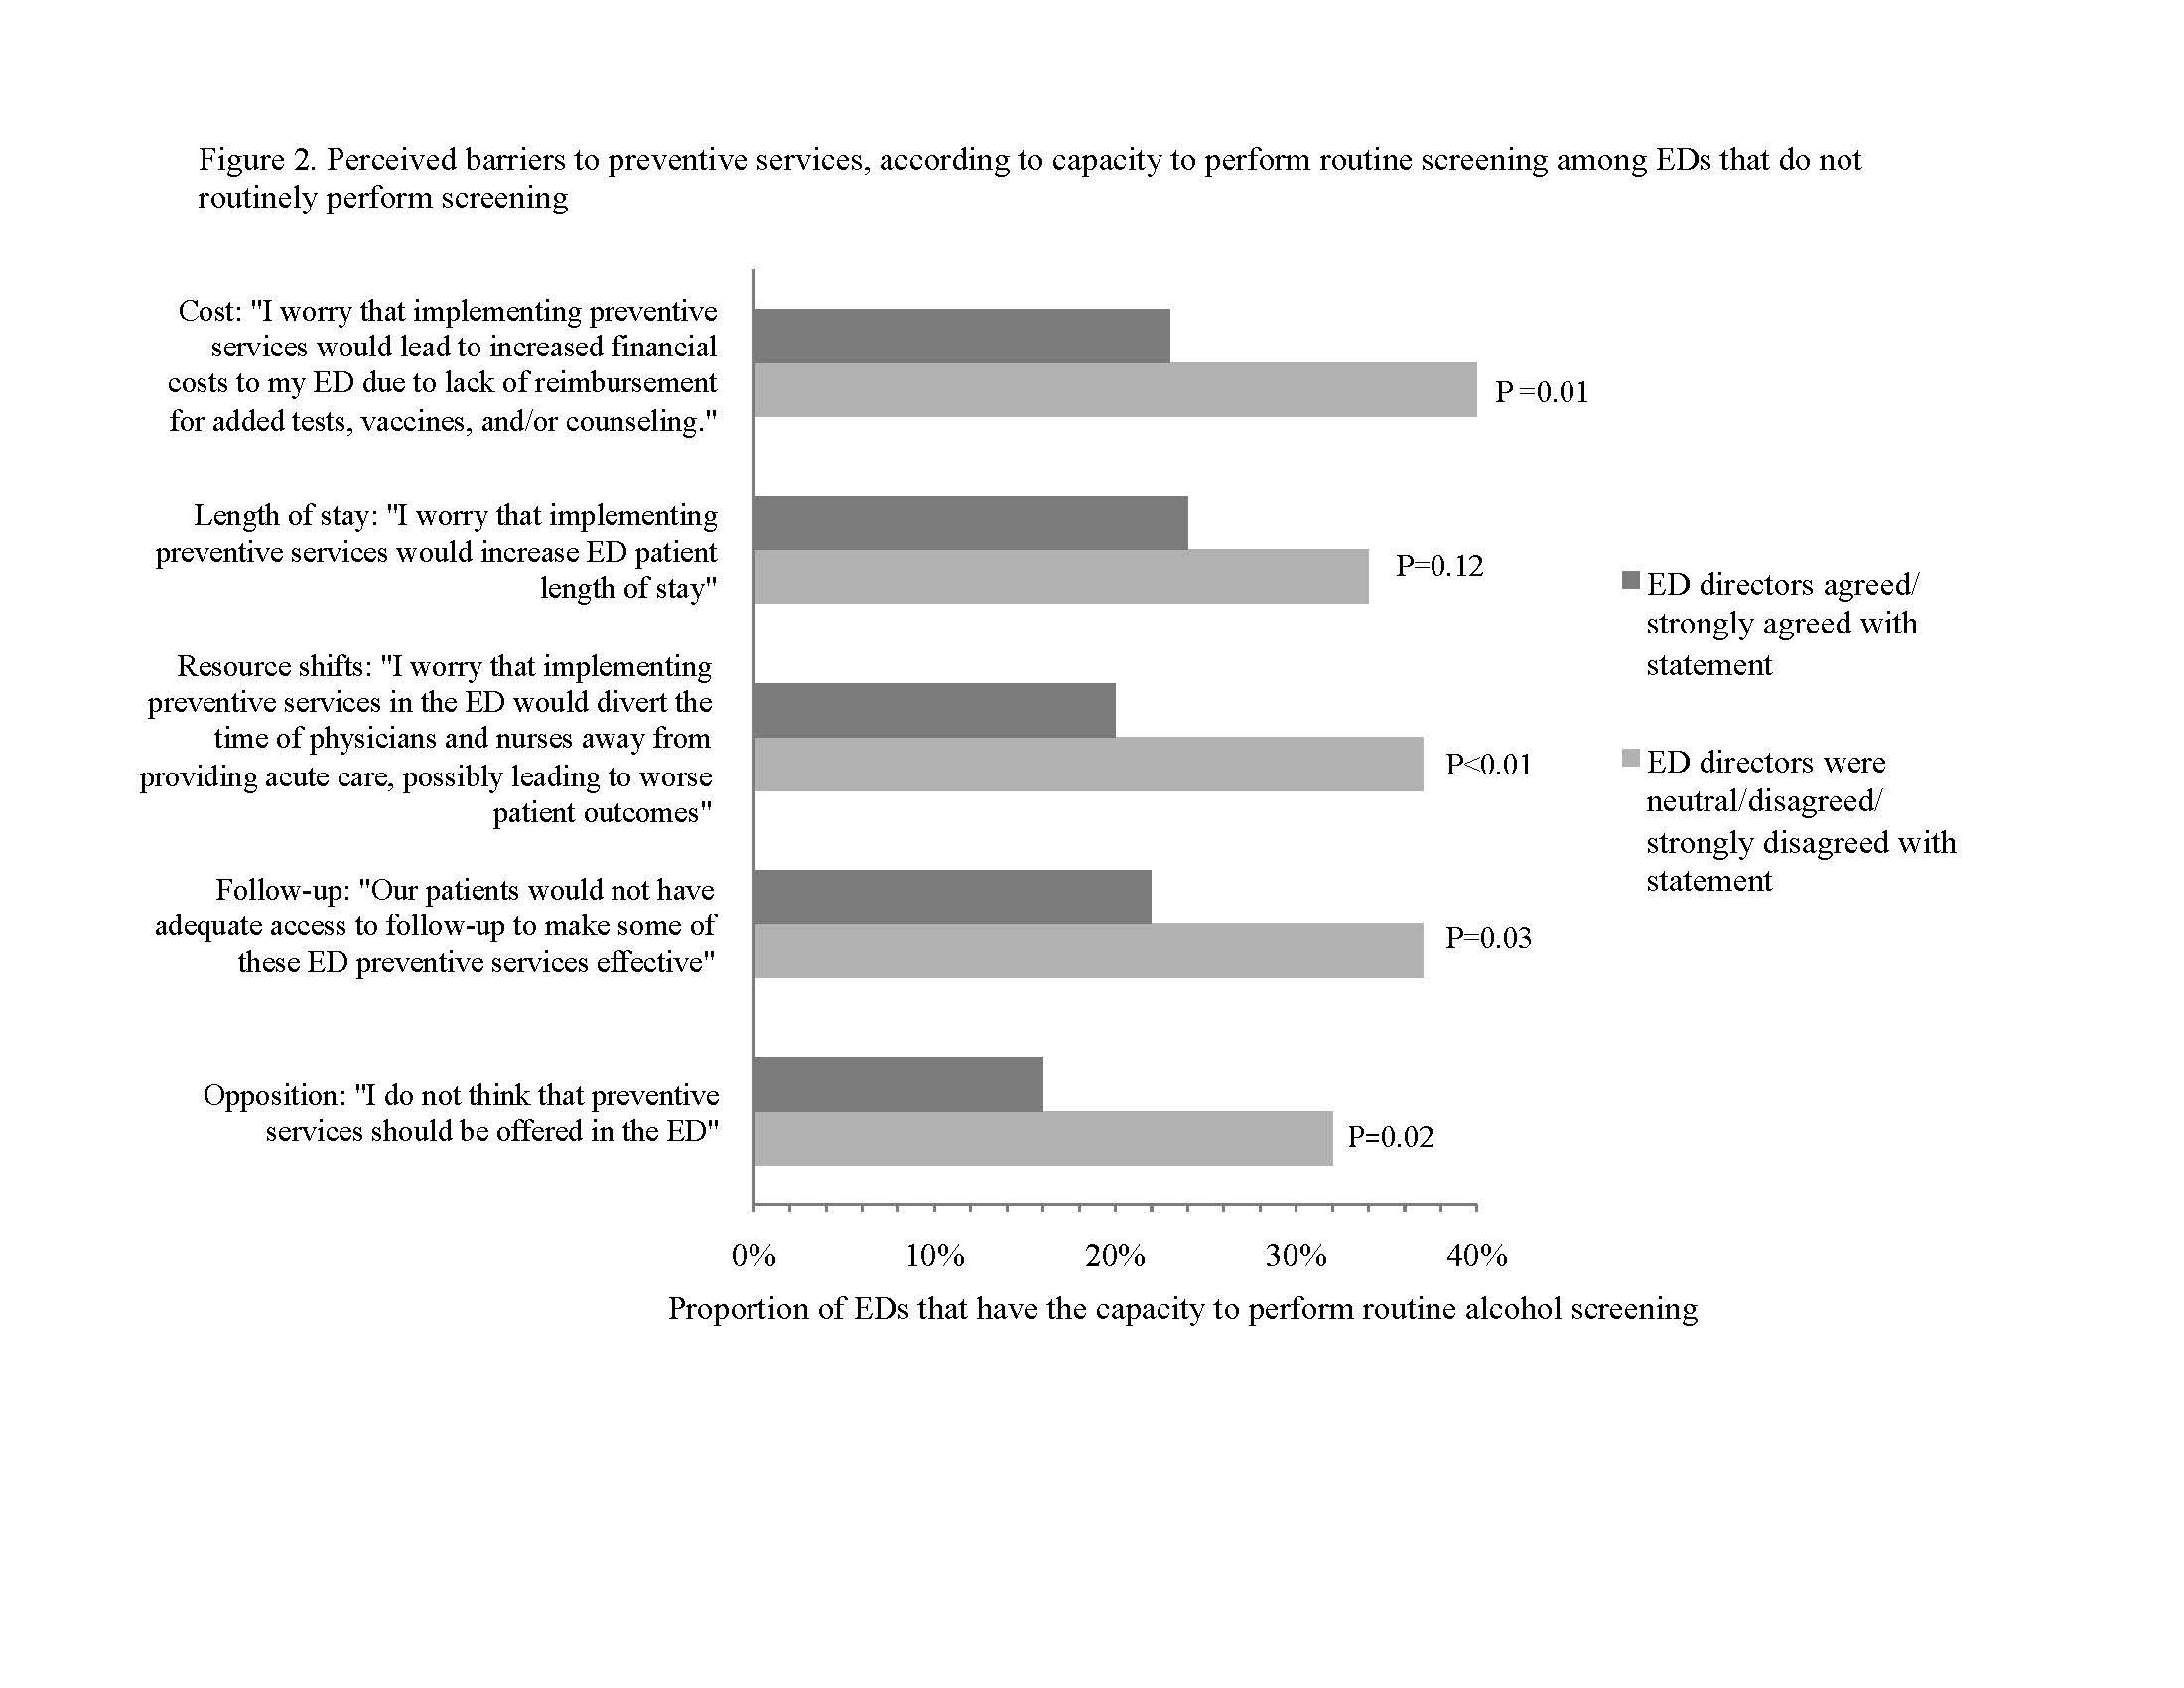 Figure 2 Perceived barriers to preventive services, according to capacity to perform routine screening among emergency departments (EDs) that do not routinely perform screening.